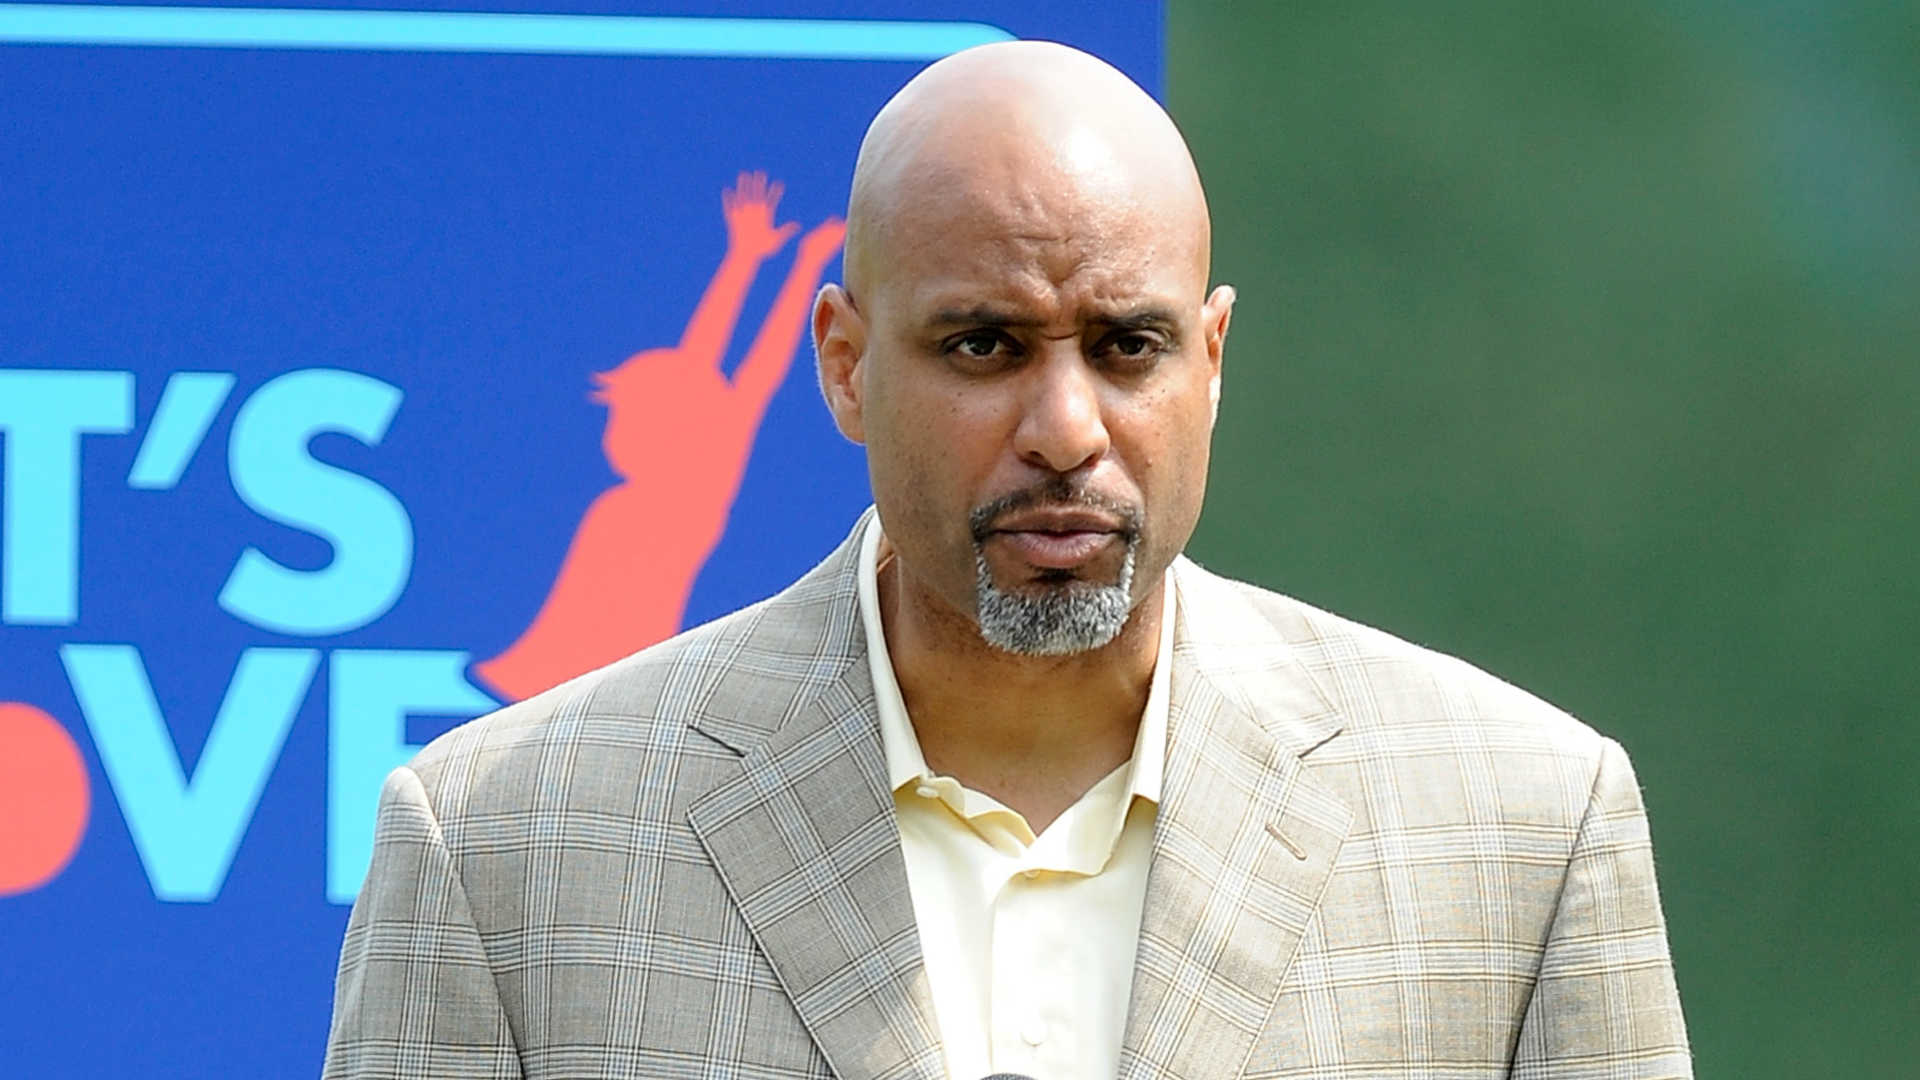 Tony Clark said commissioner Rob Manfred made his changes to pace of play without any approval from the MLBPA.